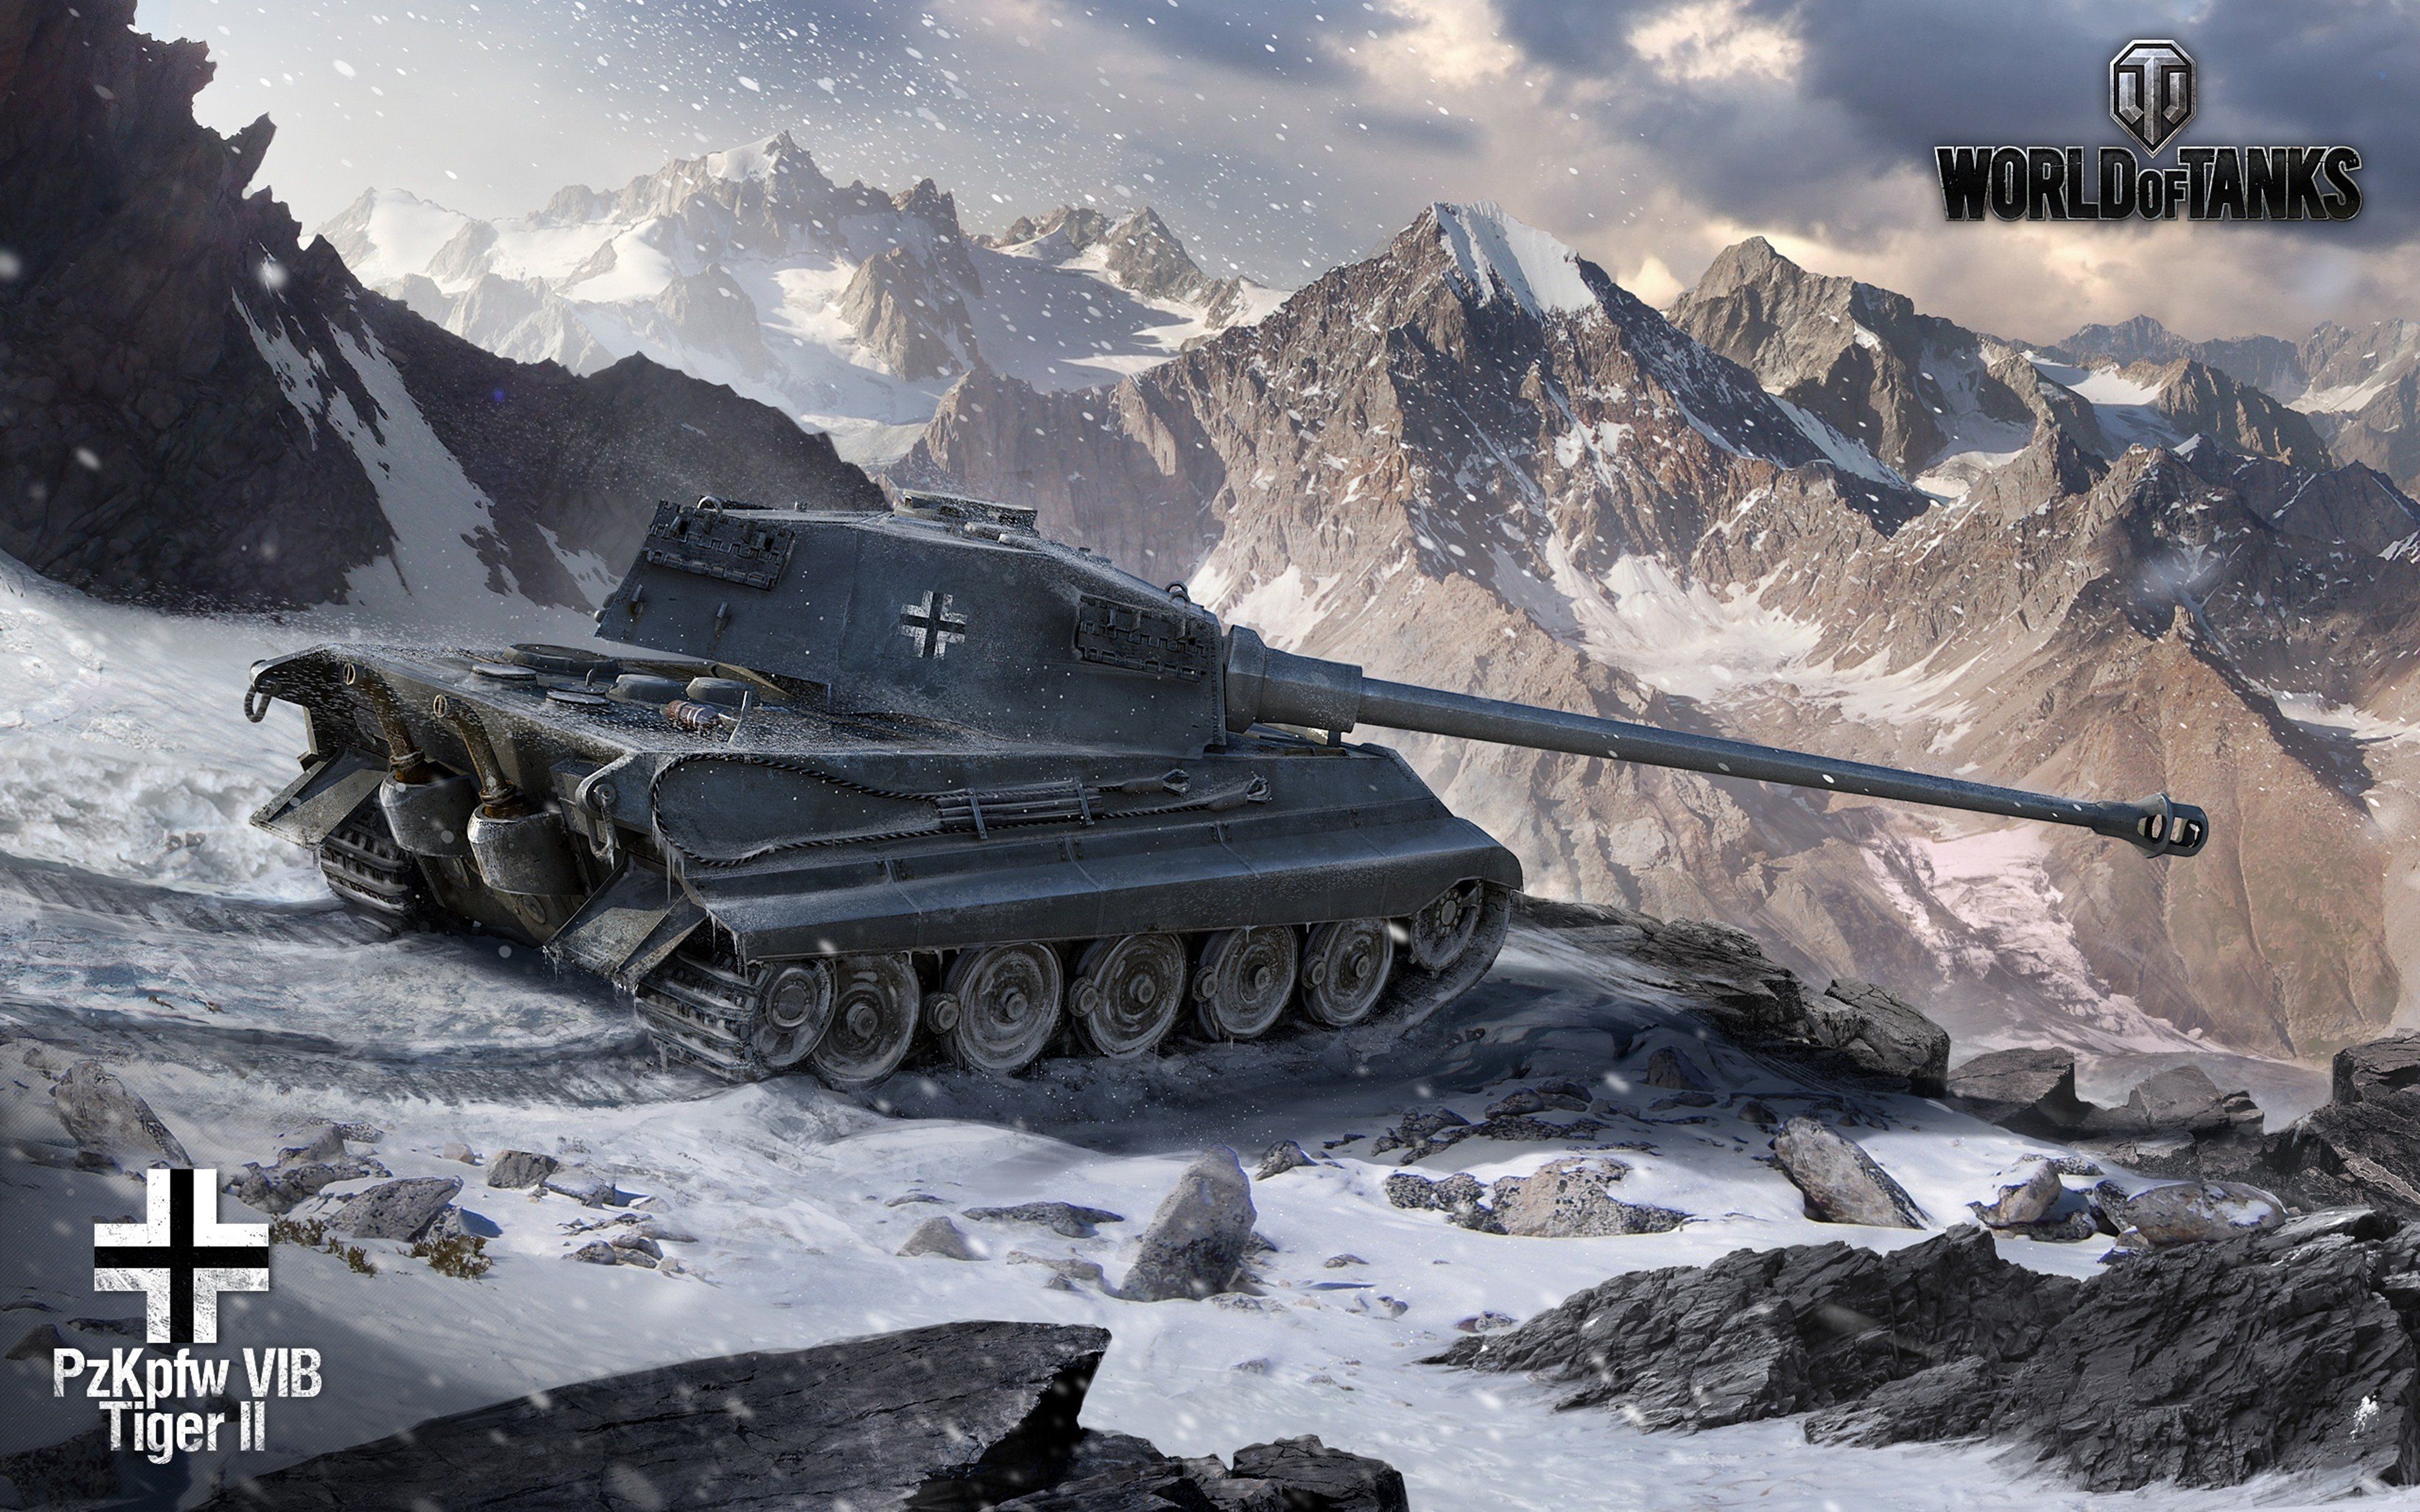 Tiger Ii World Of Tanks Tank Video Games Video Game Art Snow Mountains Logo Clouds Sky 4000x2500